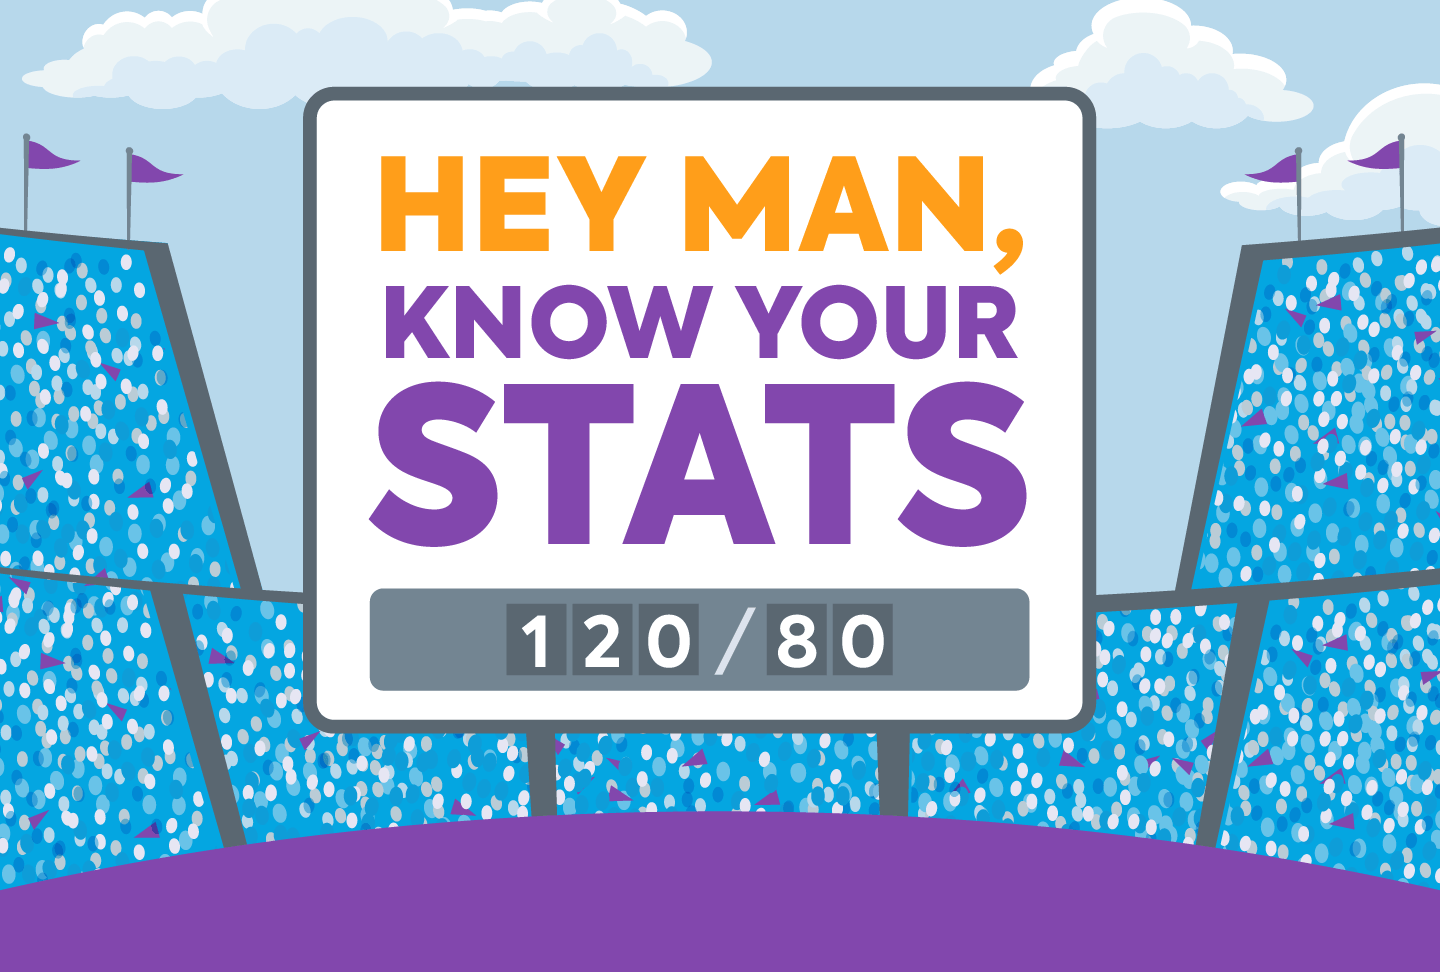 Hey Man, Know Your Stats Image